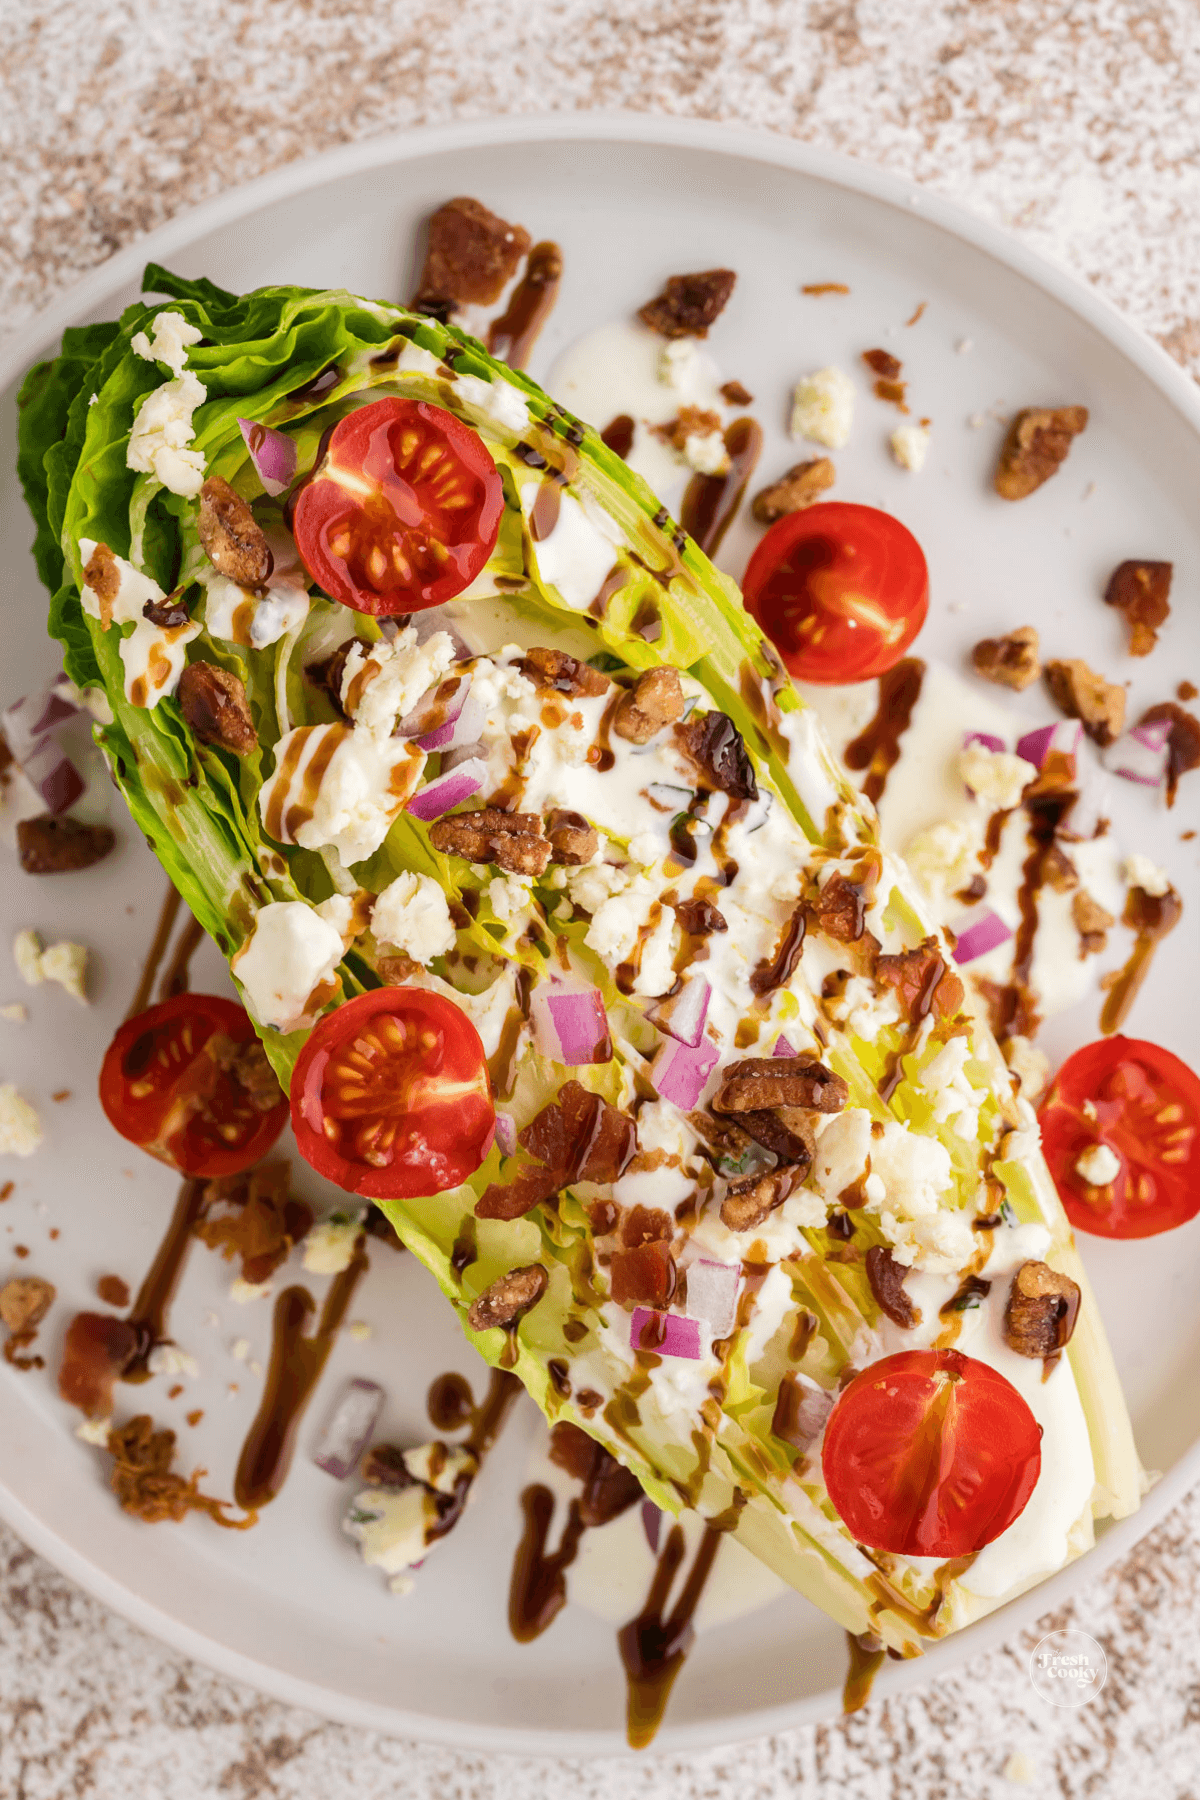  A wedge salad made with romaine lettuce topped with creamy homemade blue cheese dressing and toppings. 